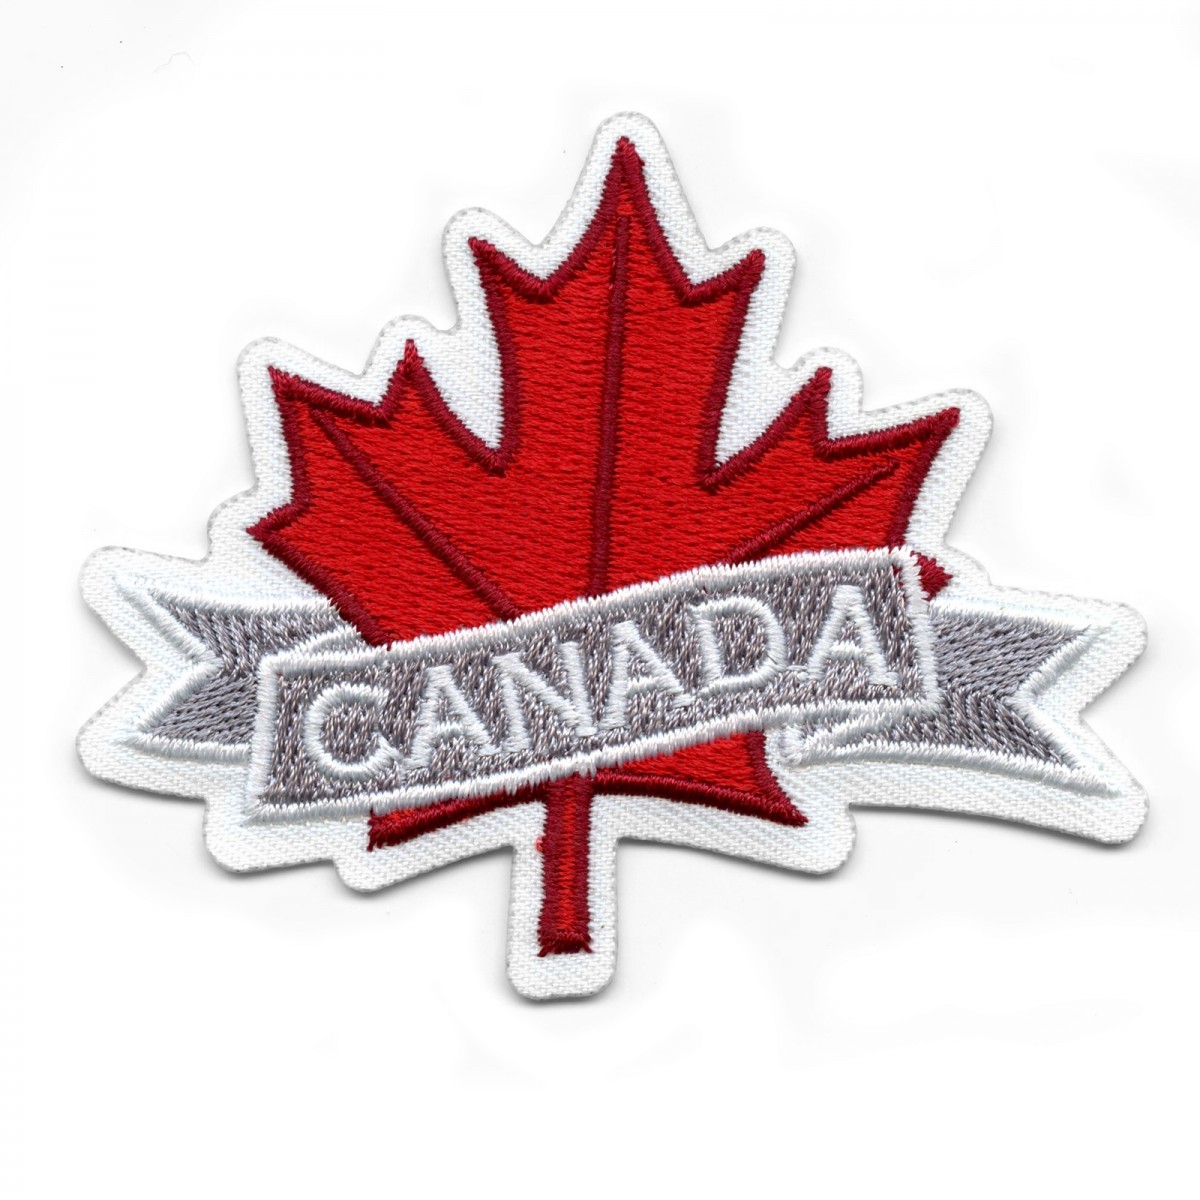 Canadian Maple Leaf Logo Embroidered Iron on Patch.